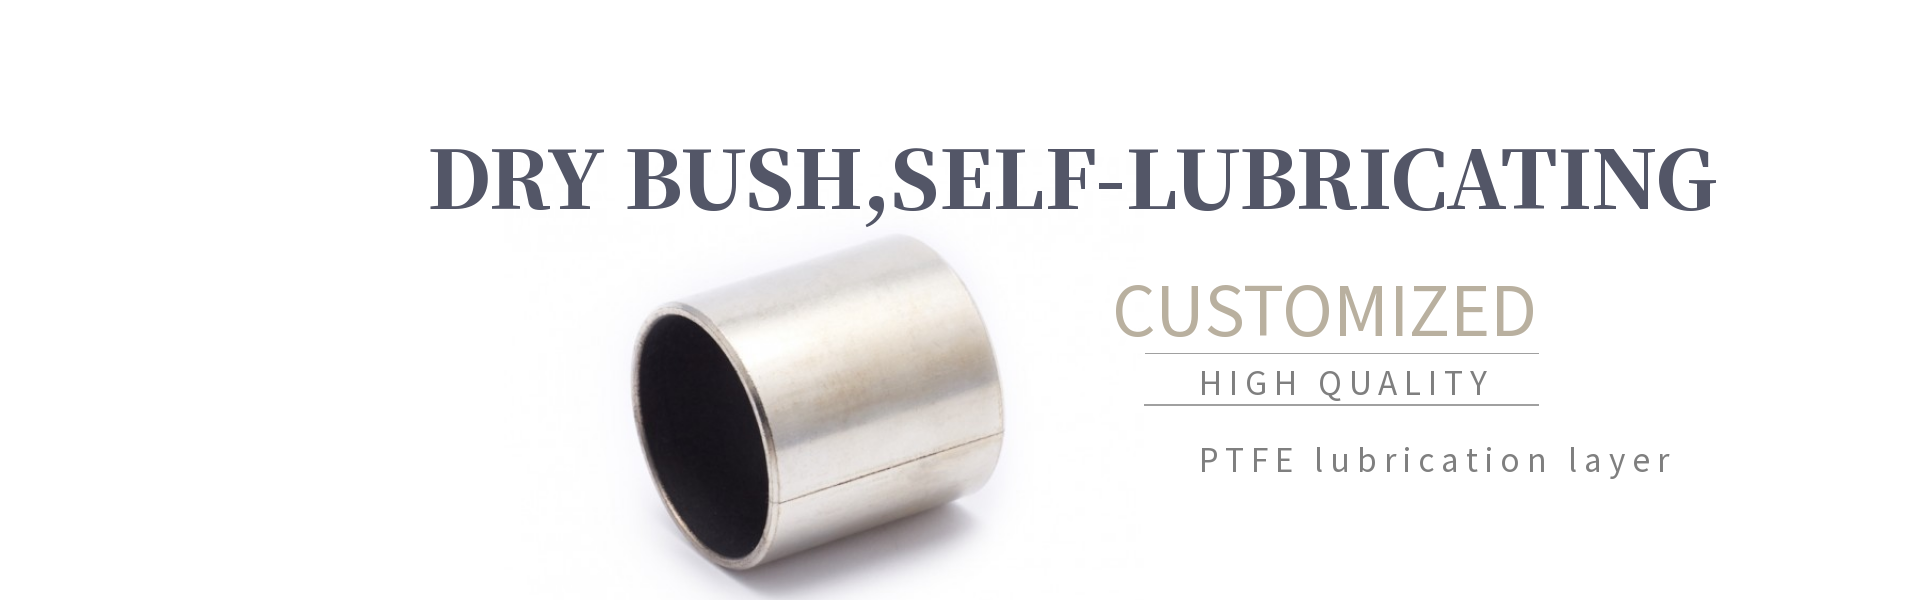 PTFE lubrication layer dry bushes